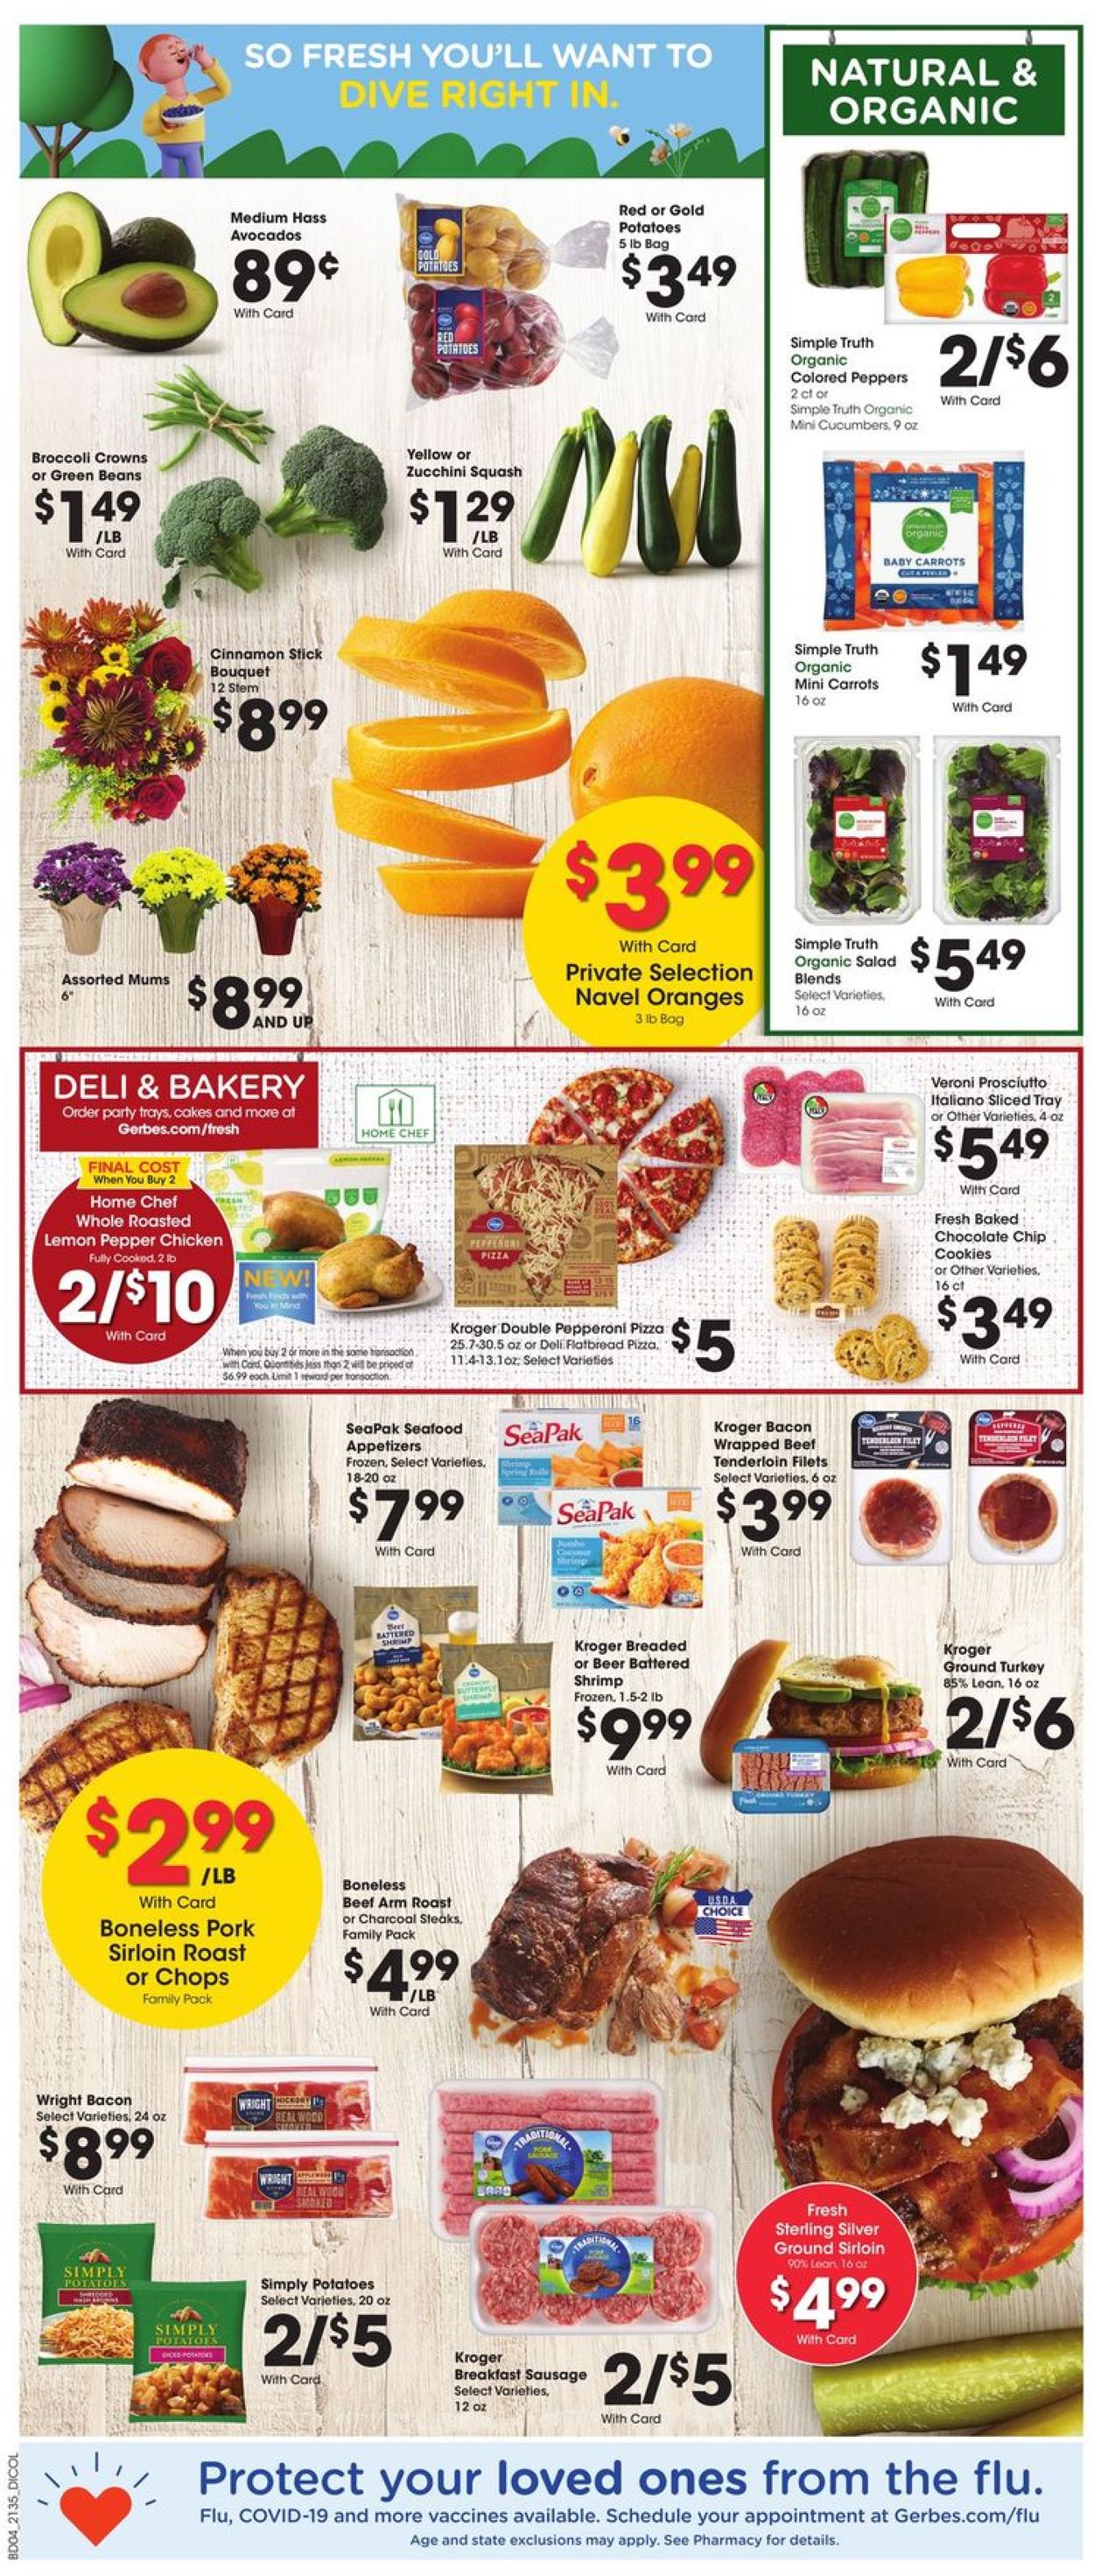 Gerbes Super Markets Current weekly ad 09/29 - 10/05/2021 [8 ...